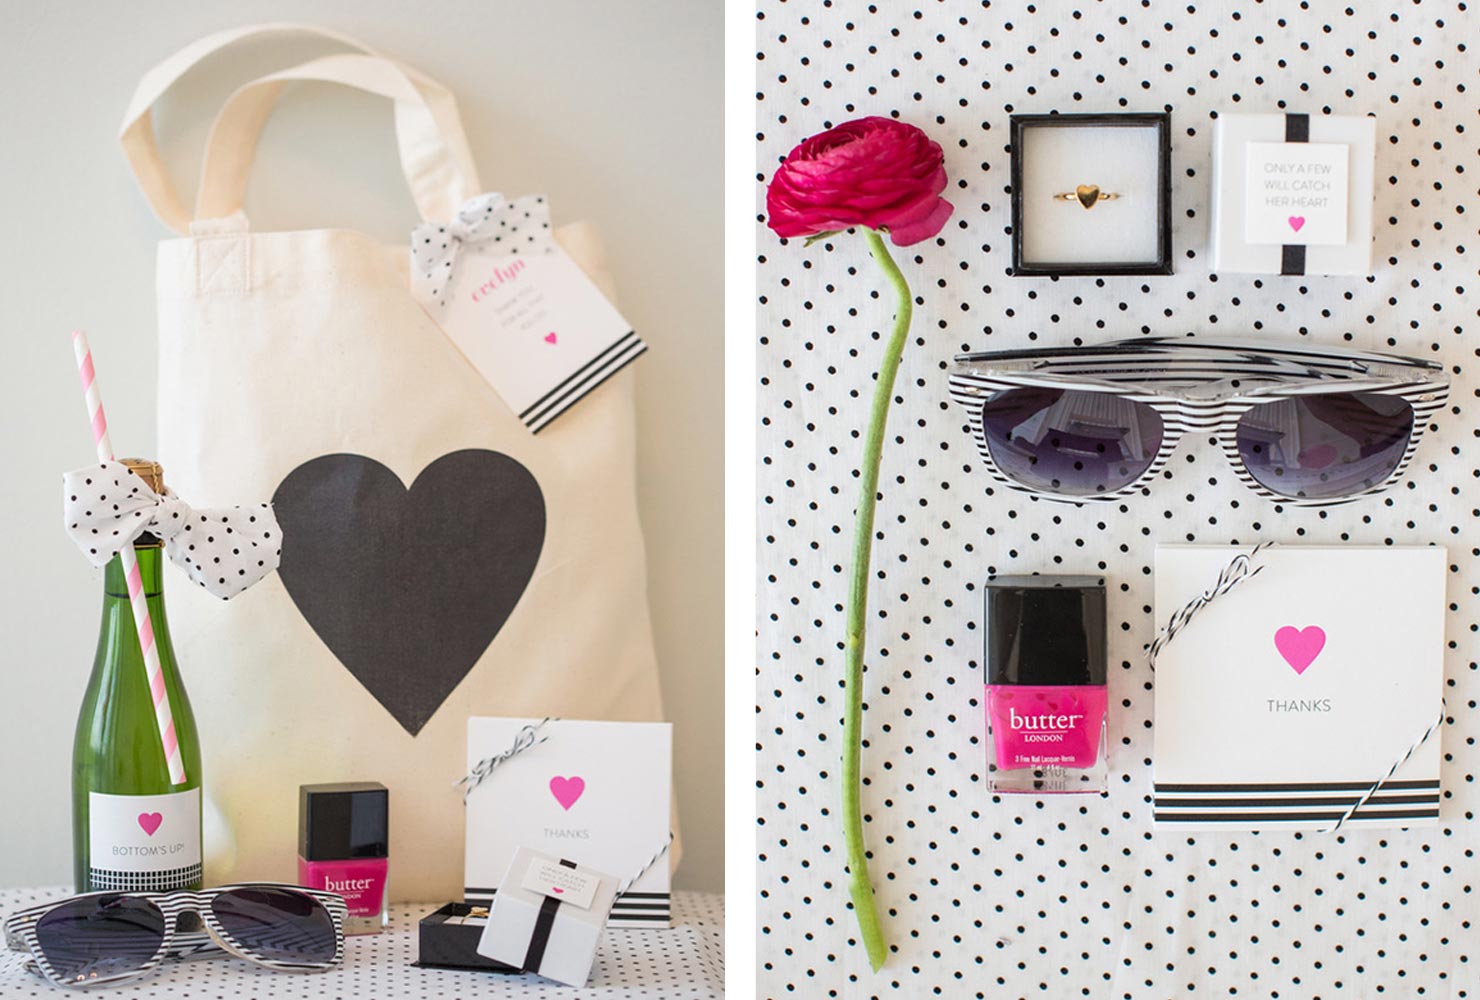 pink and black wedding gifts galore